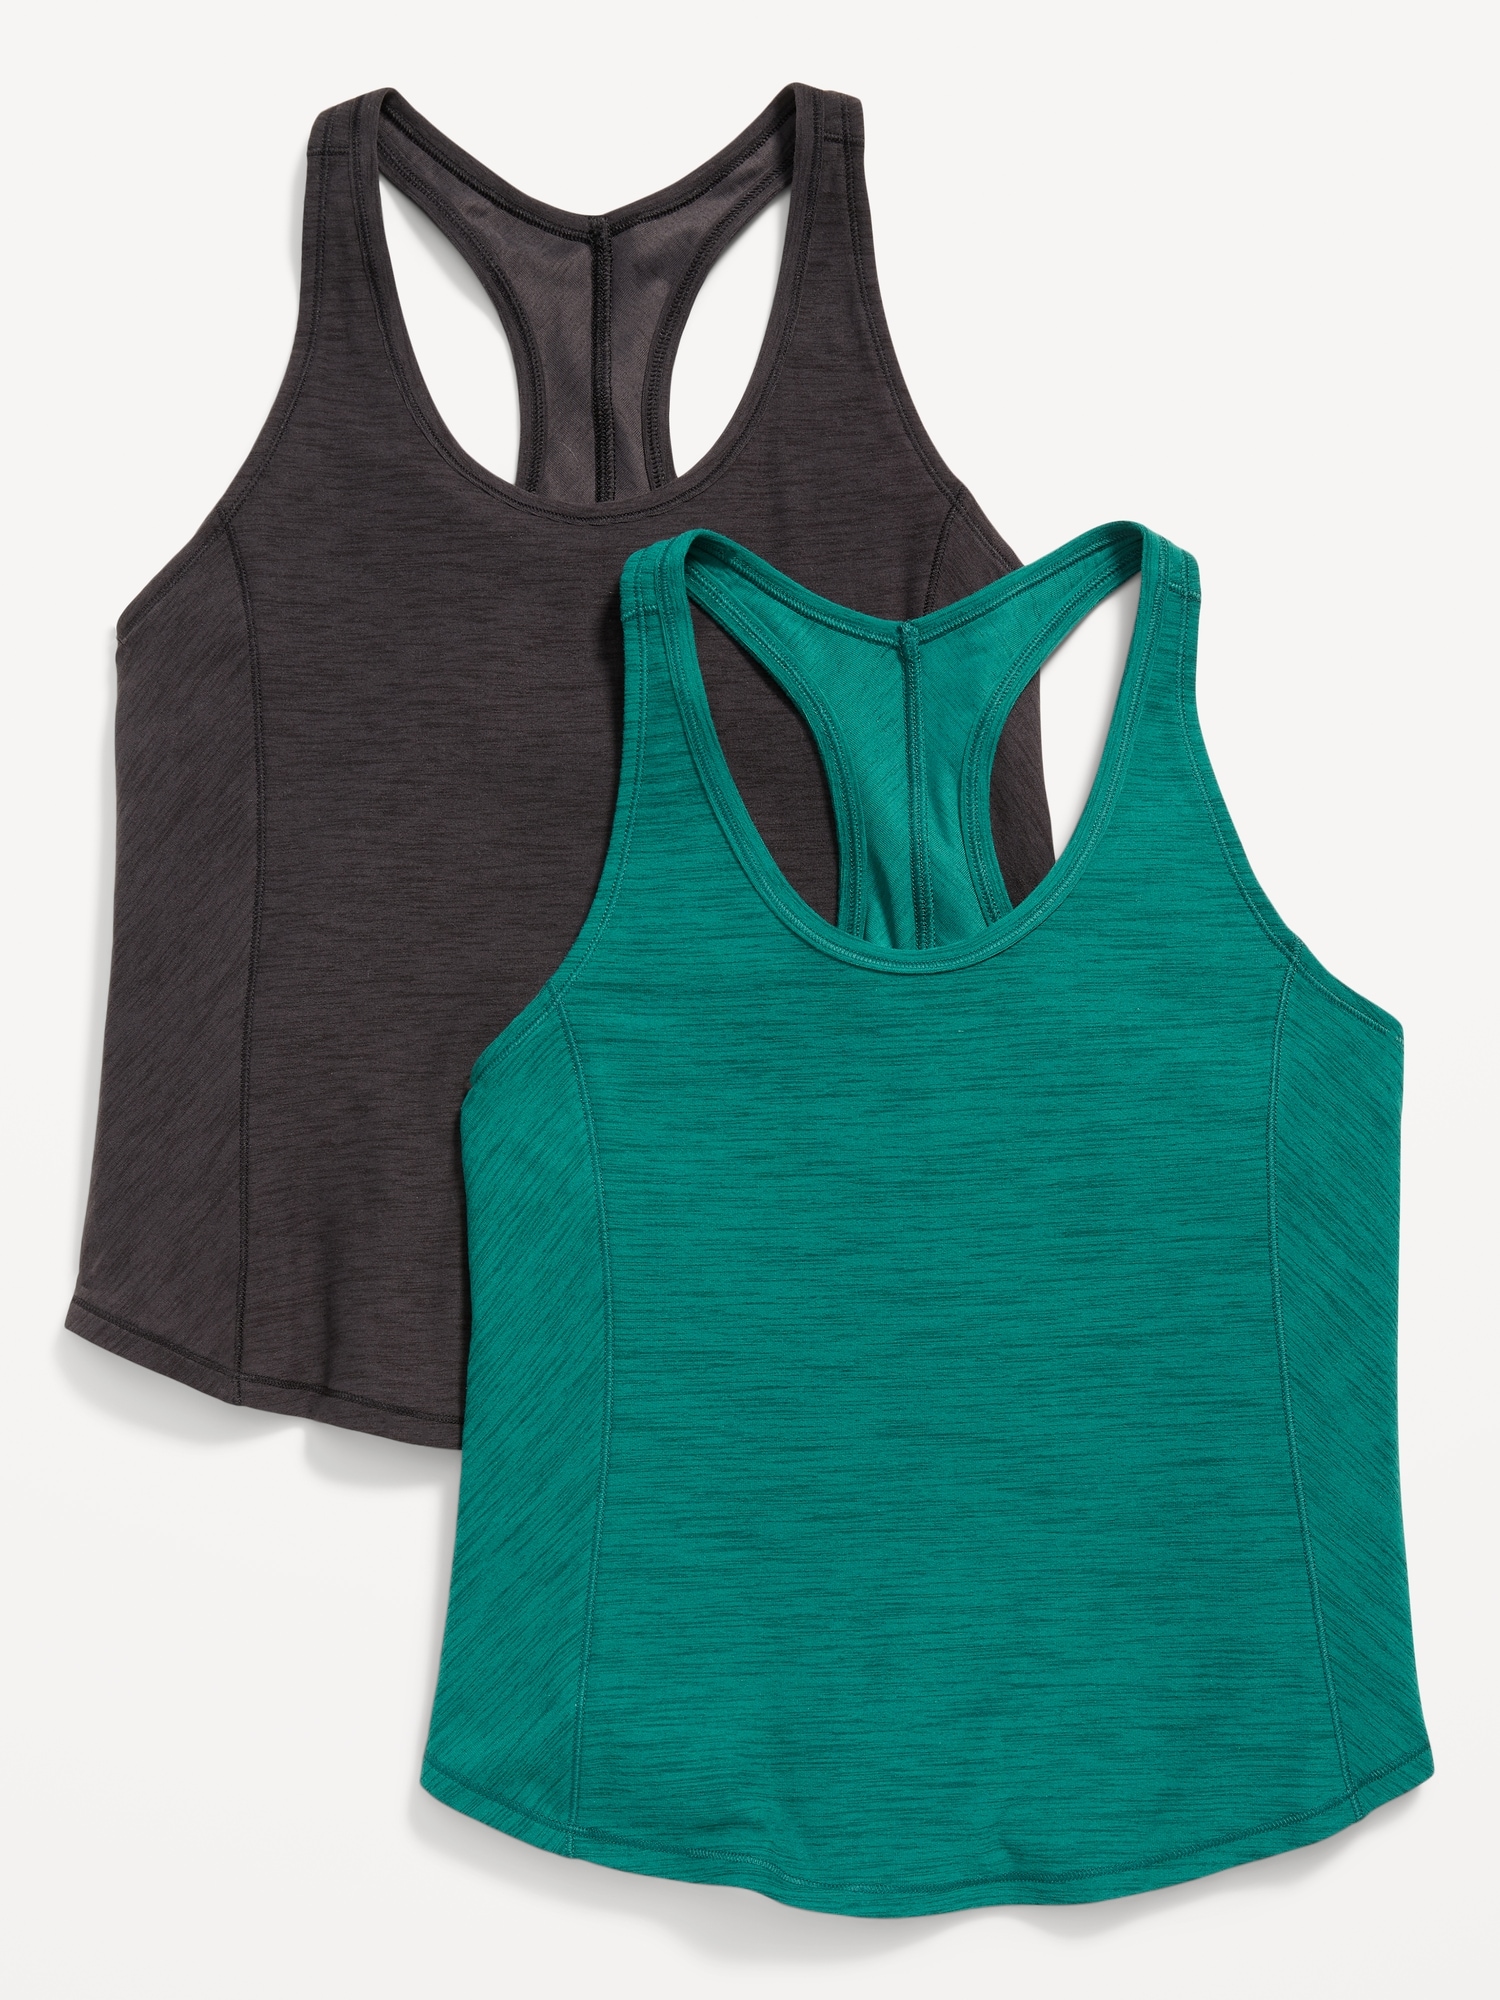 Breathe ON Cropped Racerback Tank Top for Women, Old Navy